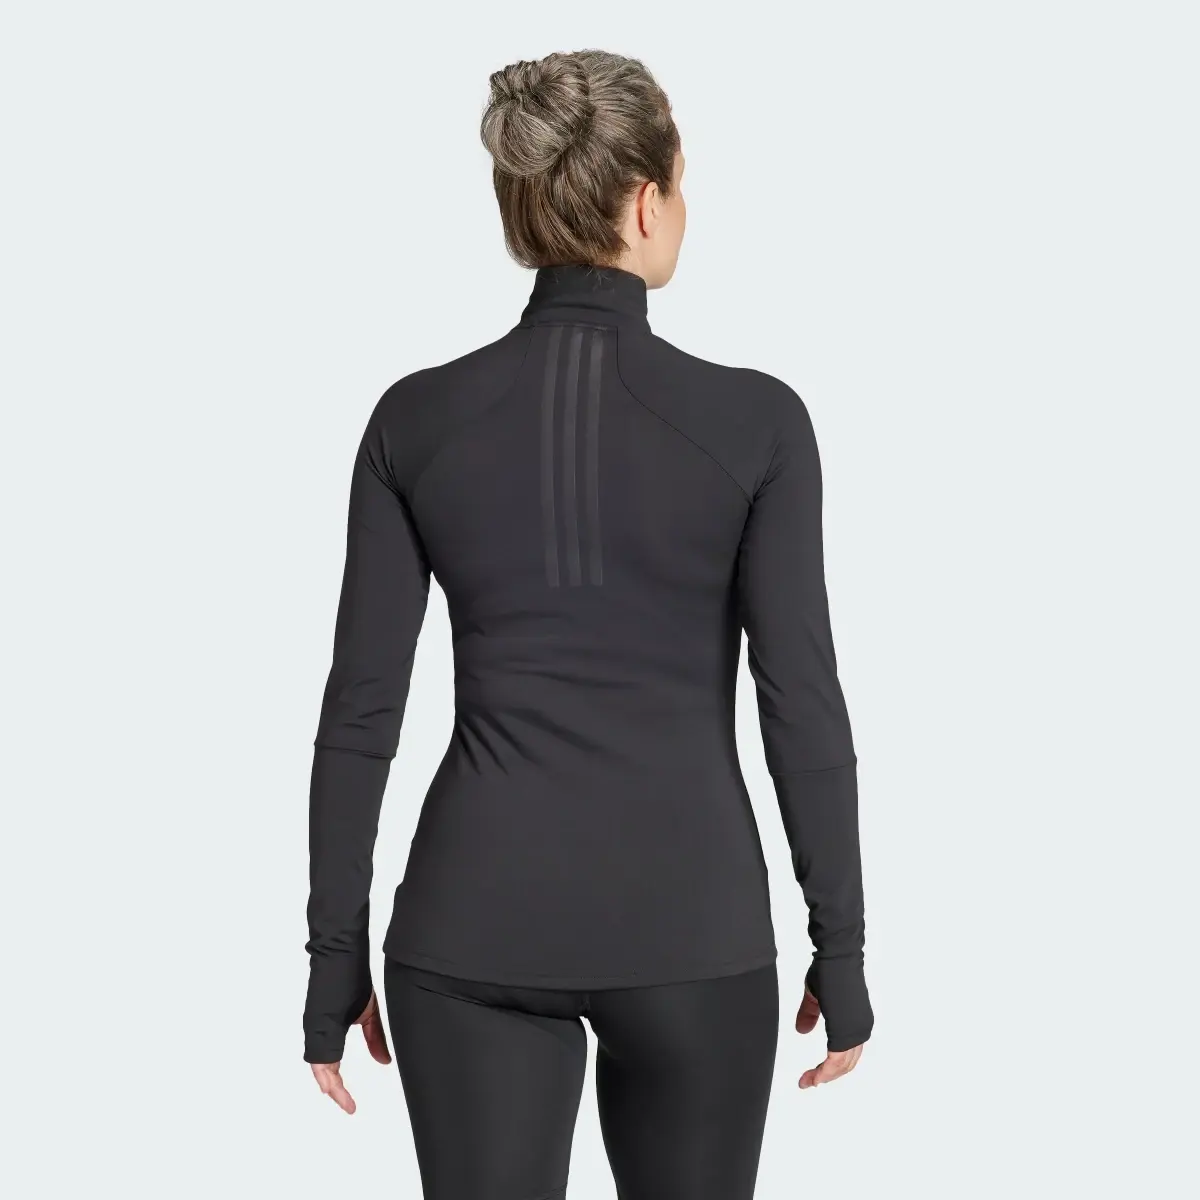 Adidas Techfit COLD.RDY 1/4 Zip Long Sleeve Training Top - HY3215